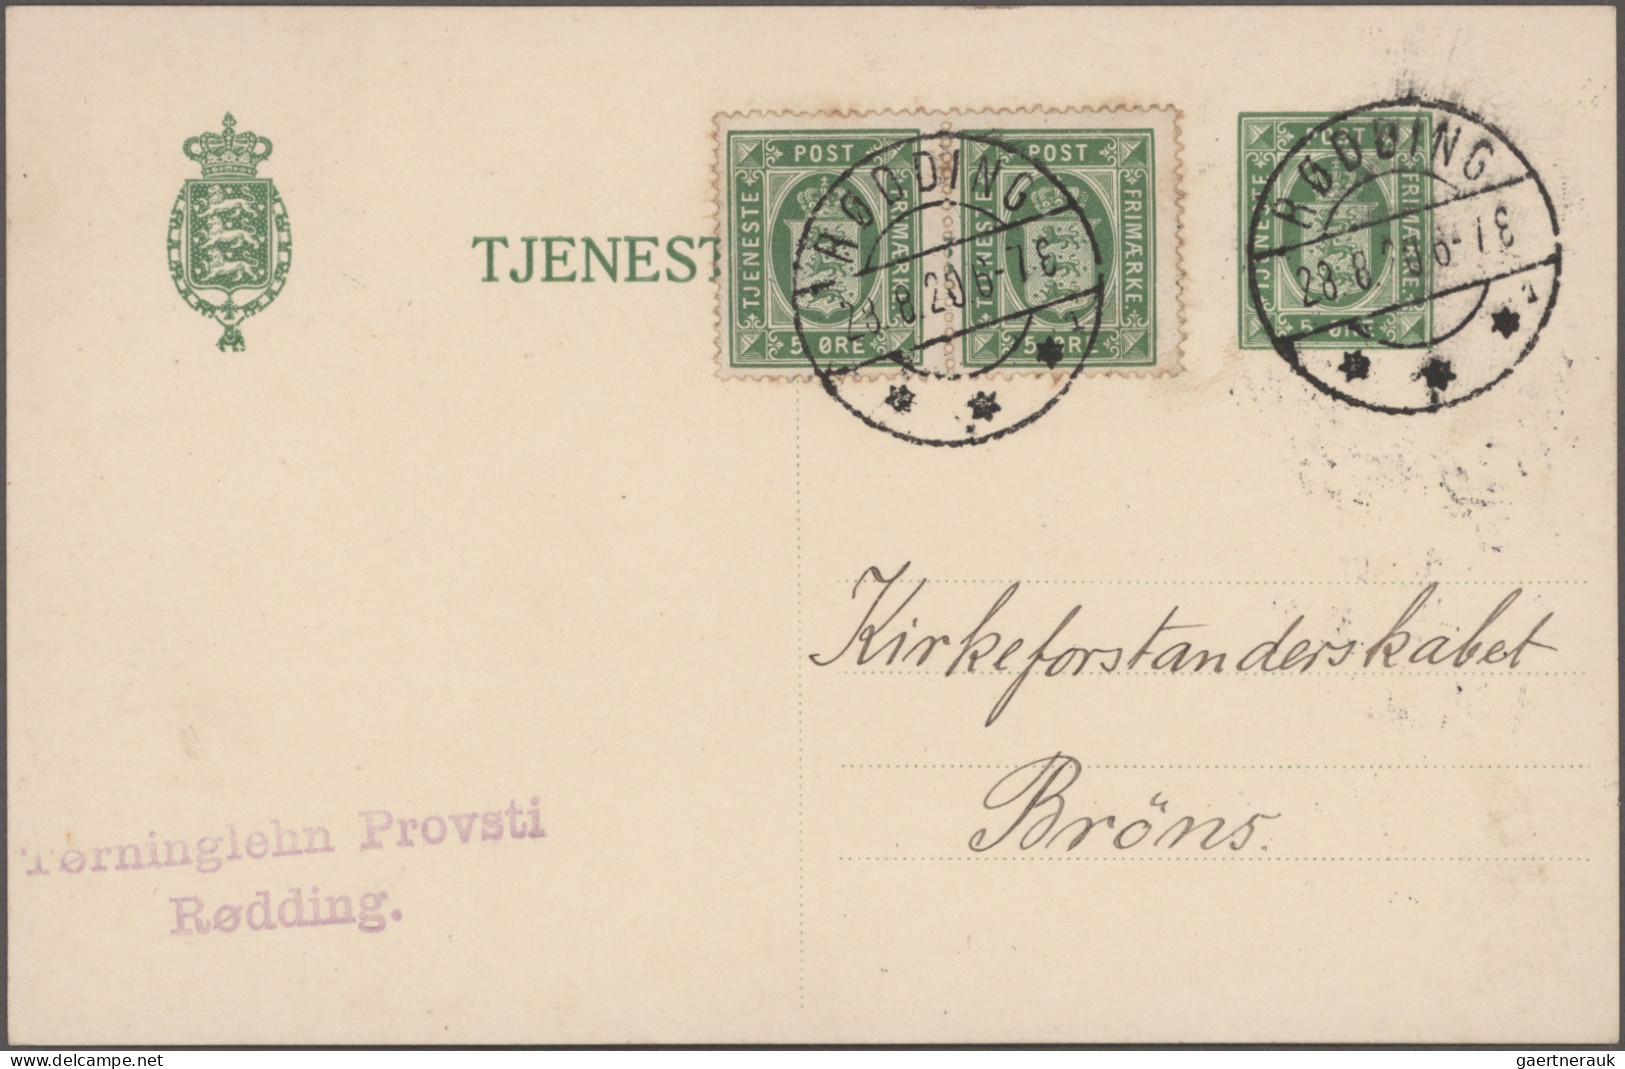 Denmark: 1855/2017, balance of apprx. 720 covers/cards/stationeries showing a gr